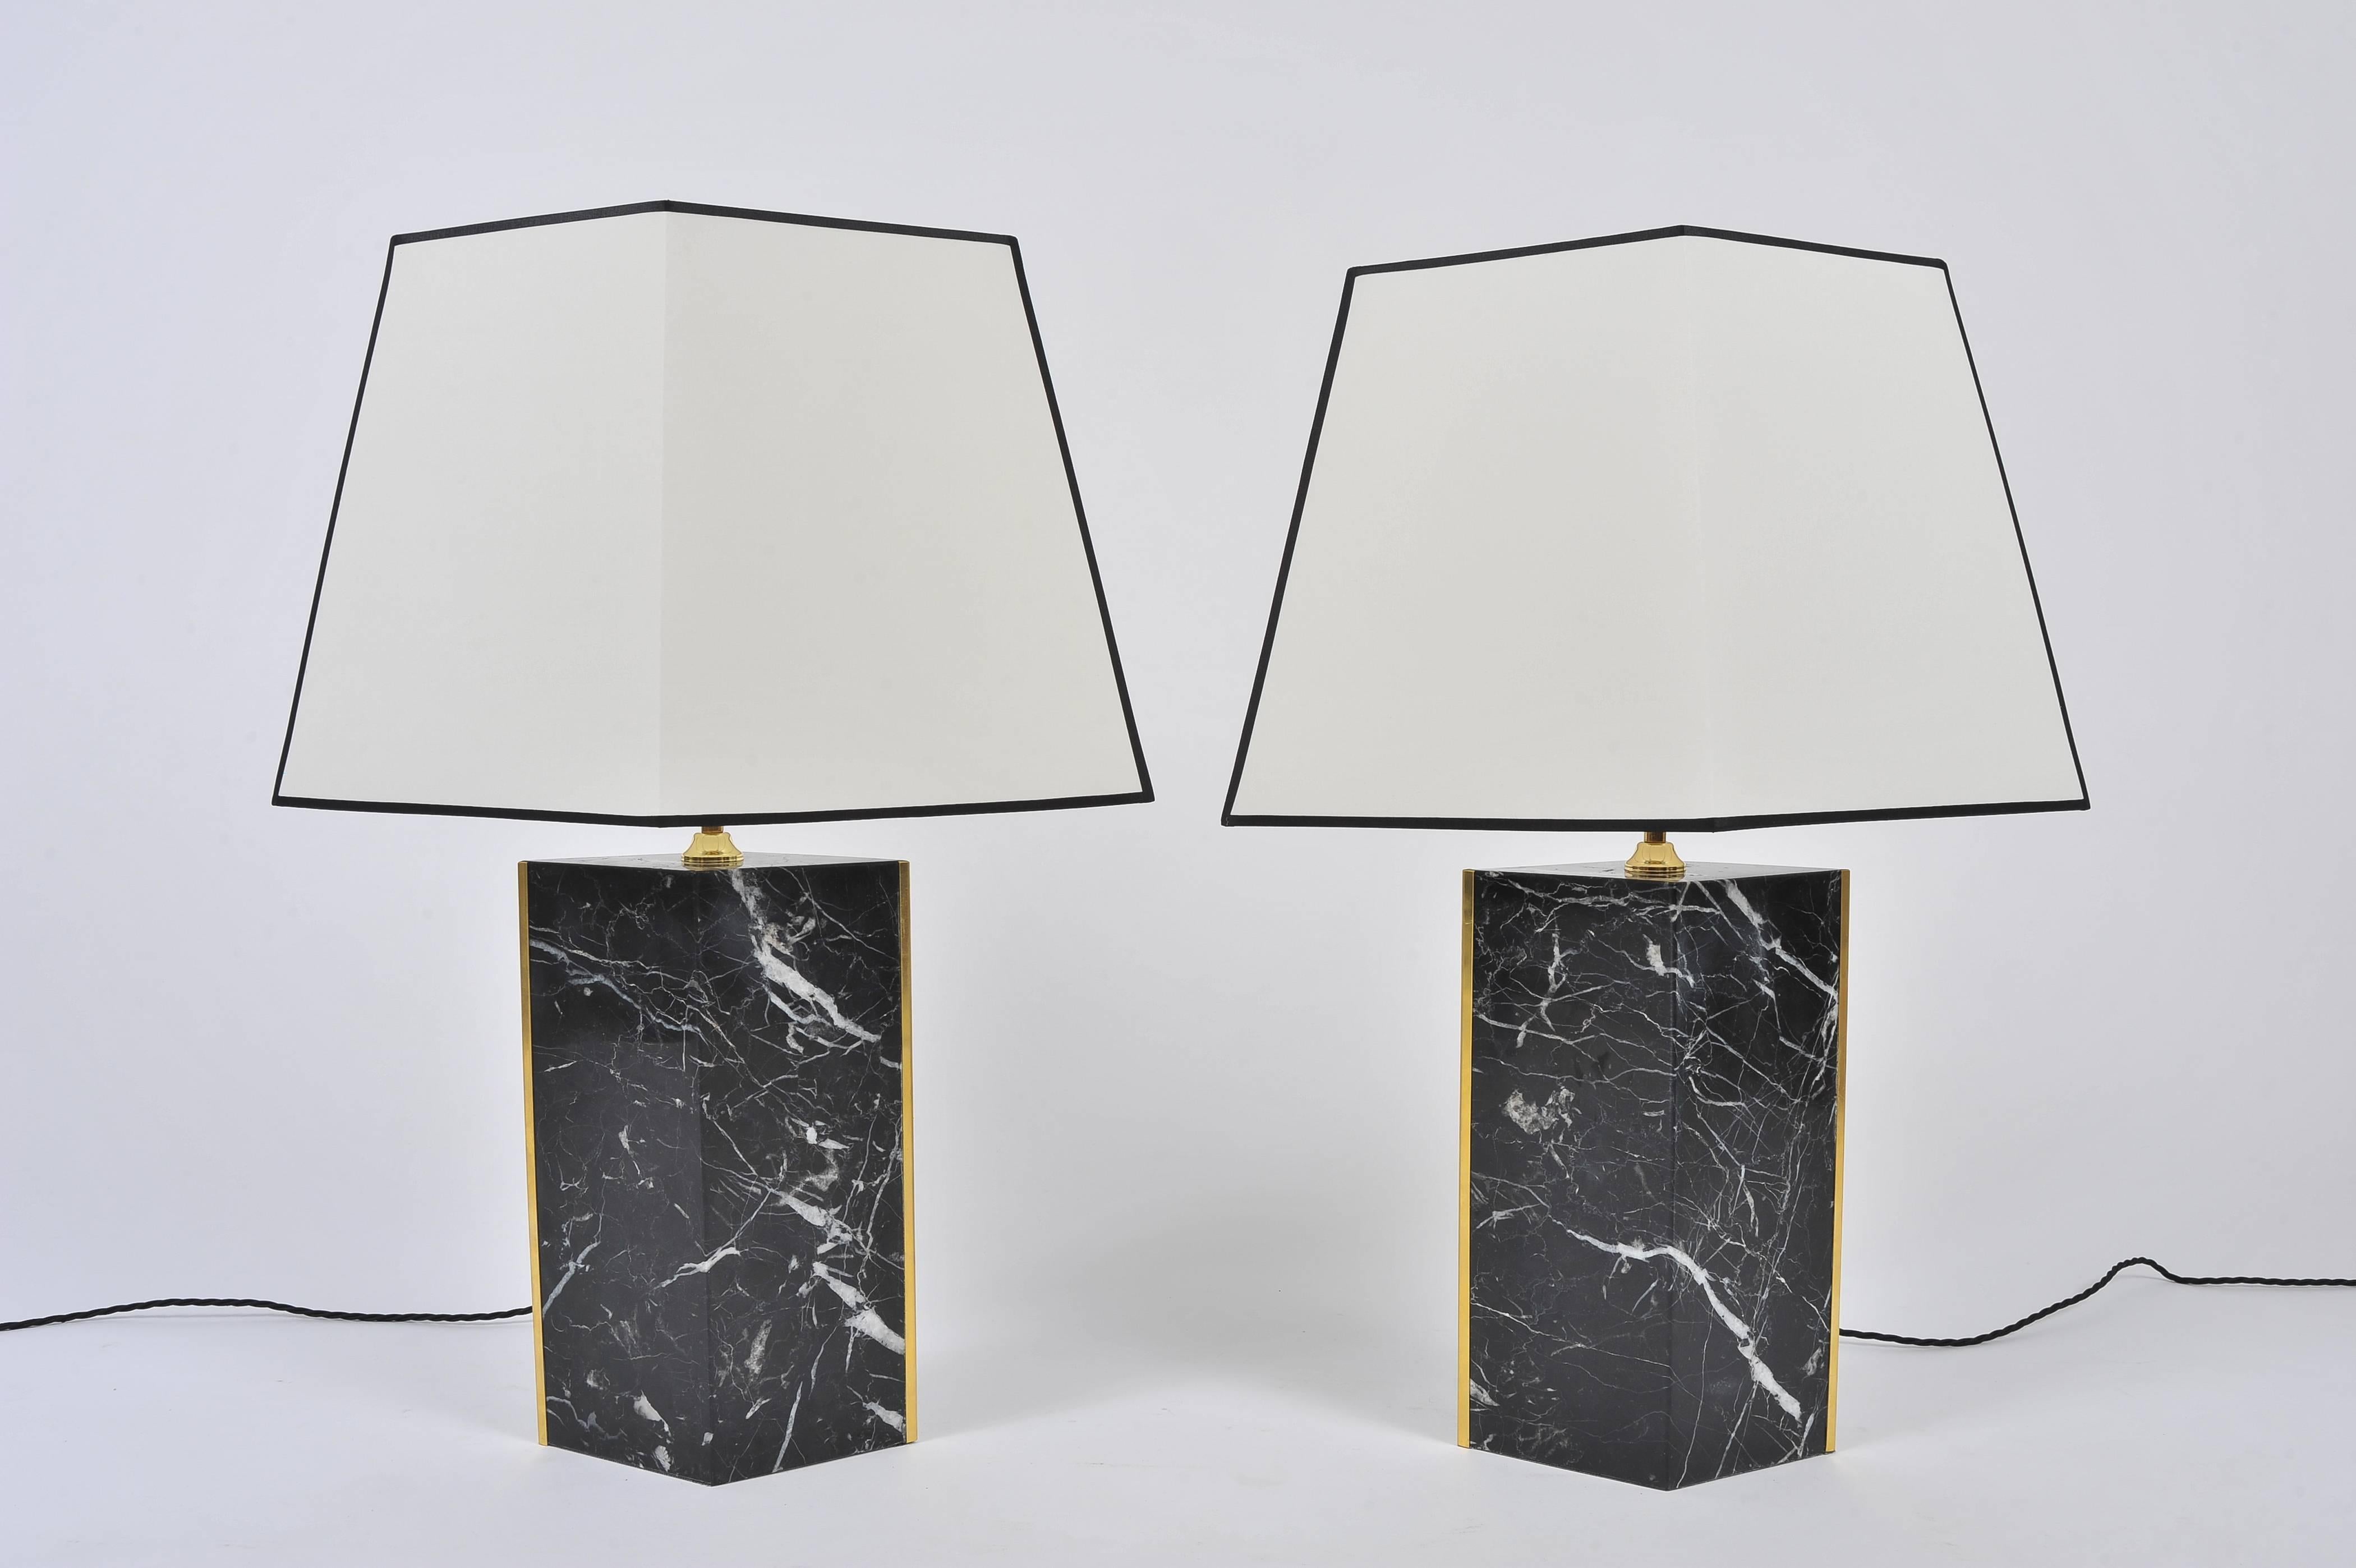 A pair of solid brass and black marble lozange shape lamps, with bespoke lozange tapered black edged ivory fabric shades.
Designed by Dorian
Limited edition of 20 - This pair consists of 3/20 and 4/20
Marble sourced from Italy, brass made in the